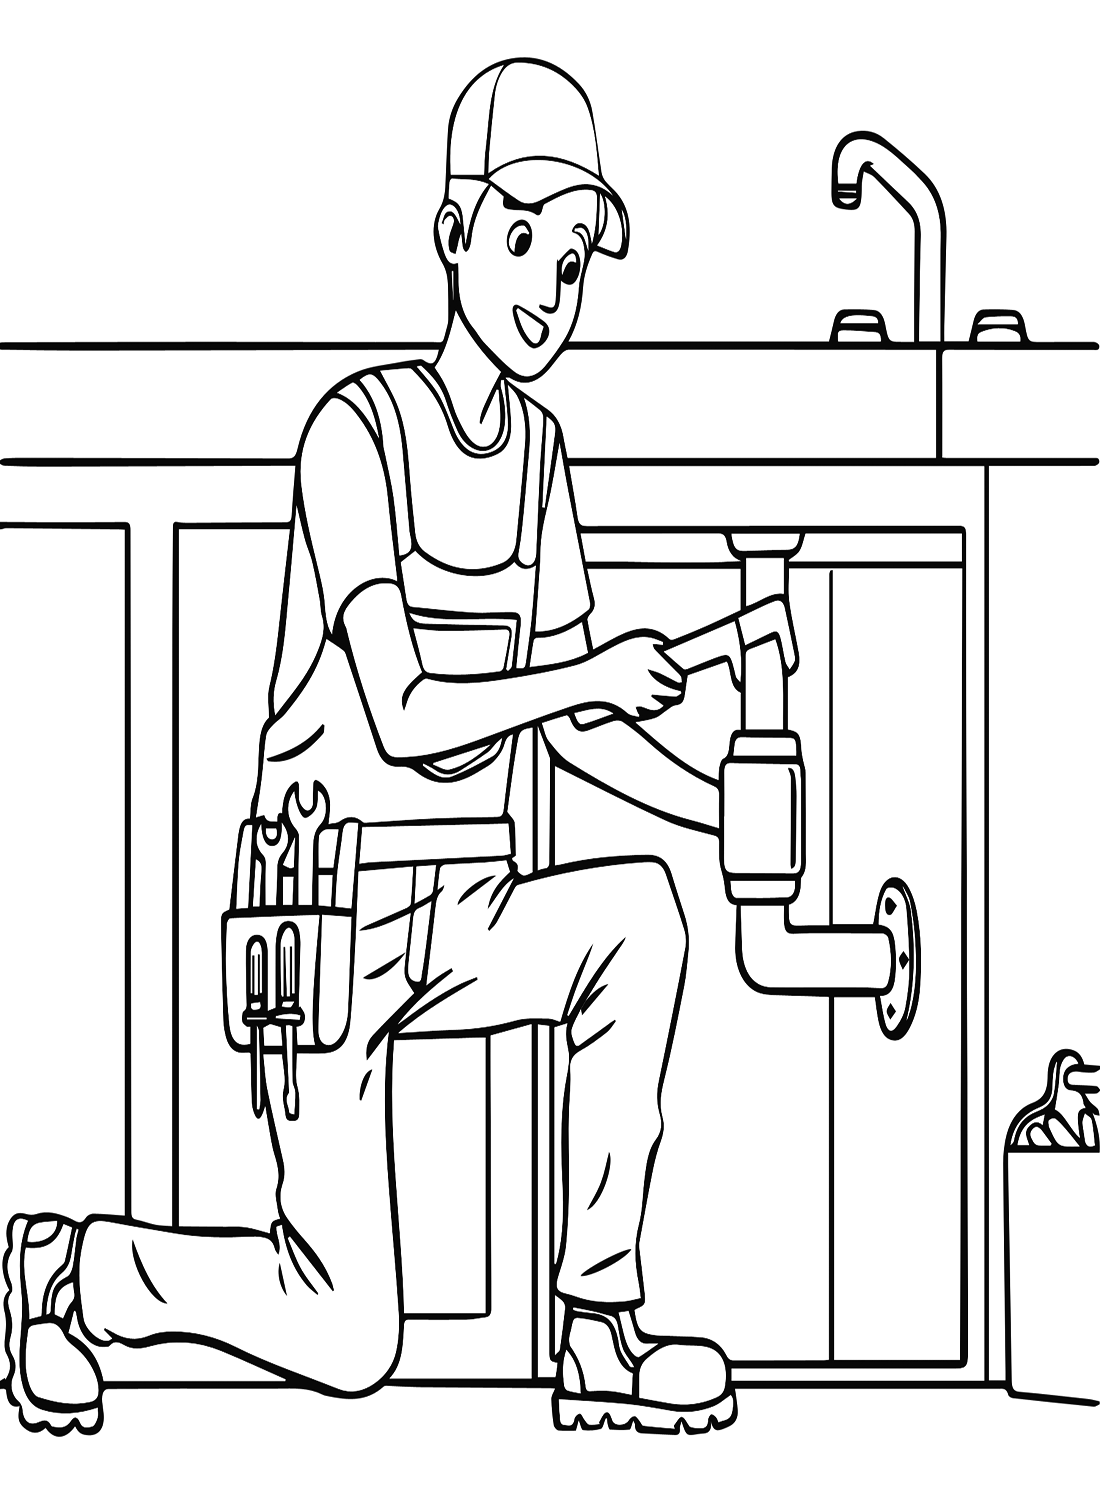 Plumber with Wrench Coloring Page